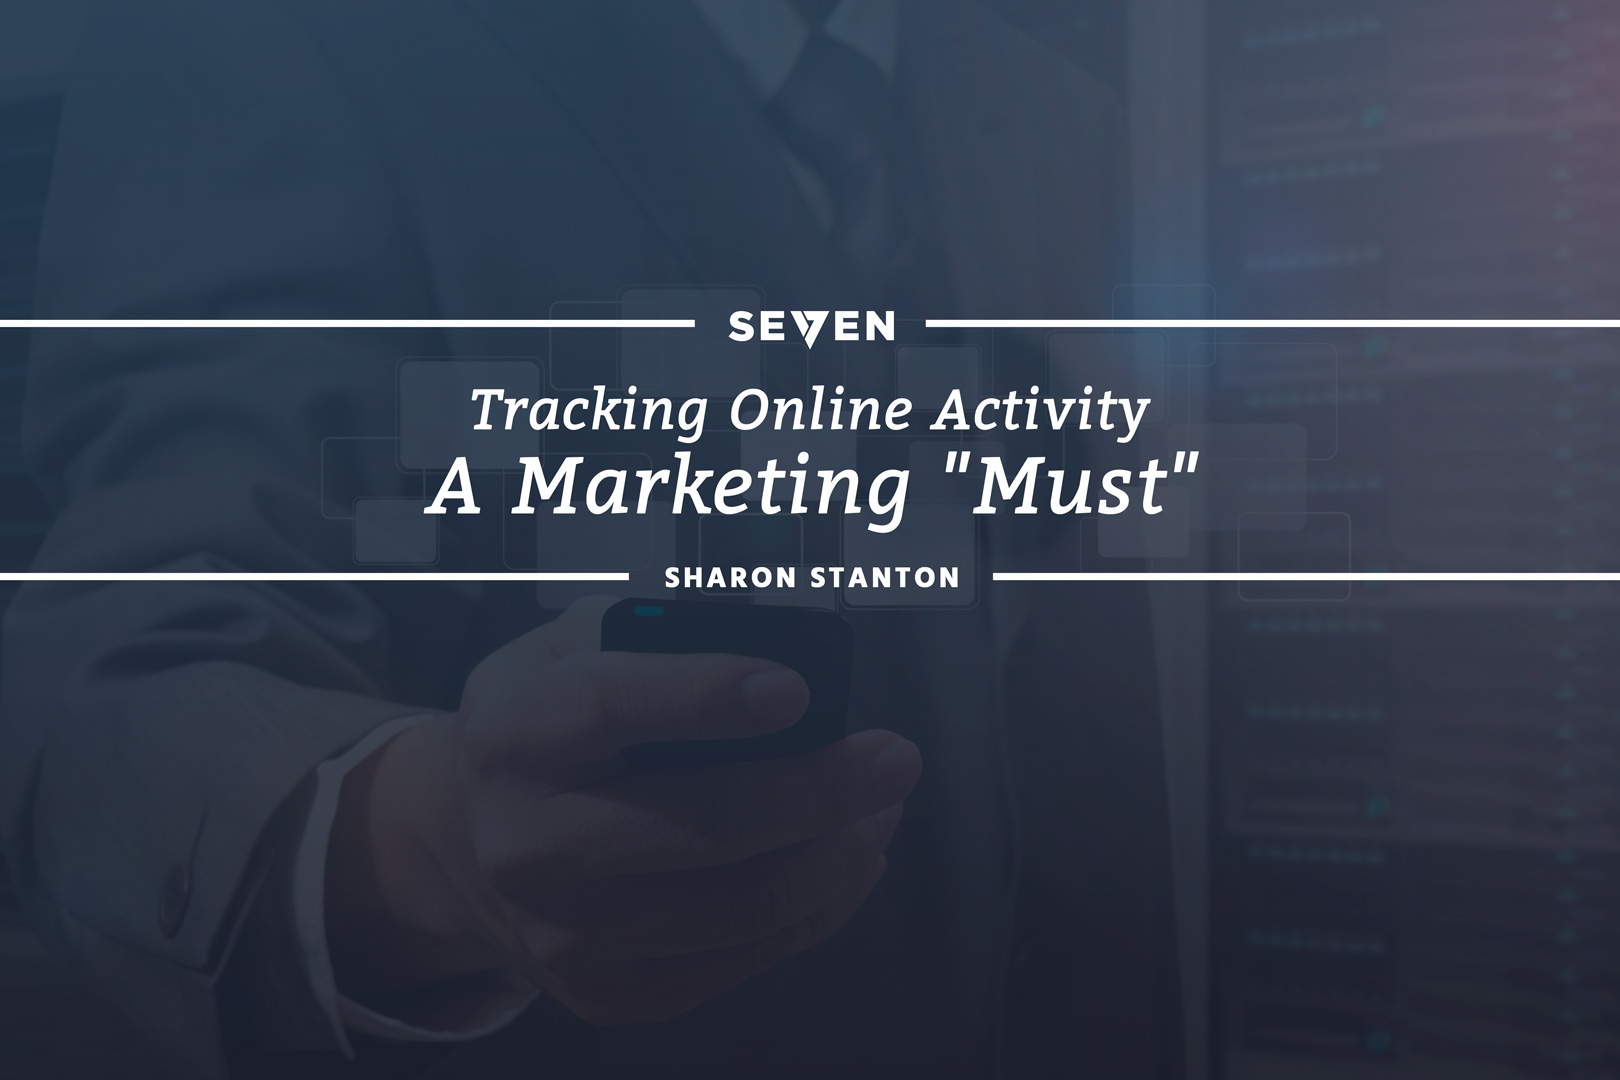 Tracking Online Activity: A Marketing “Must”